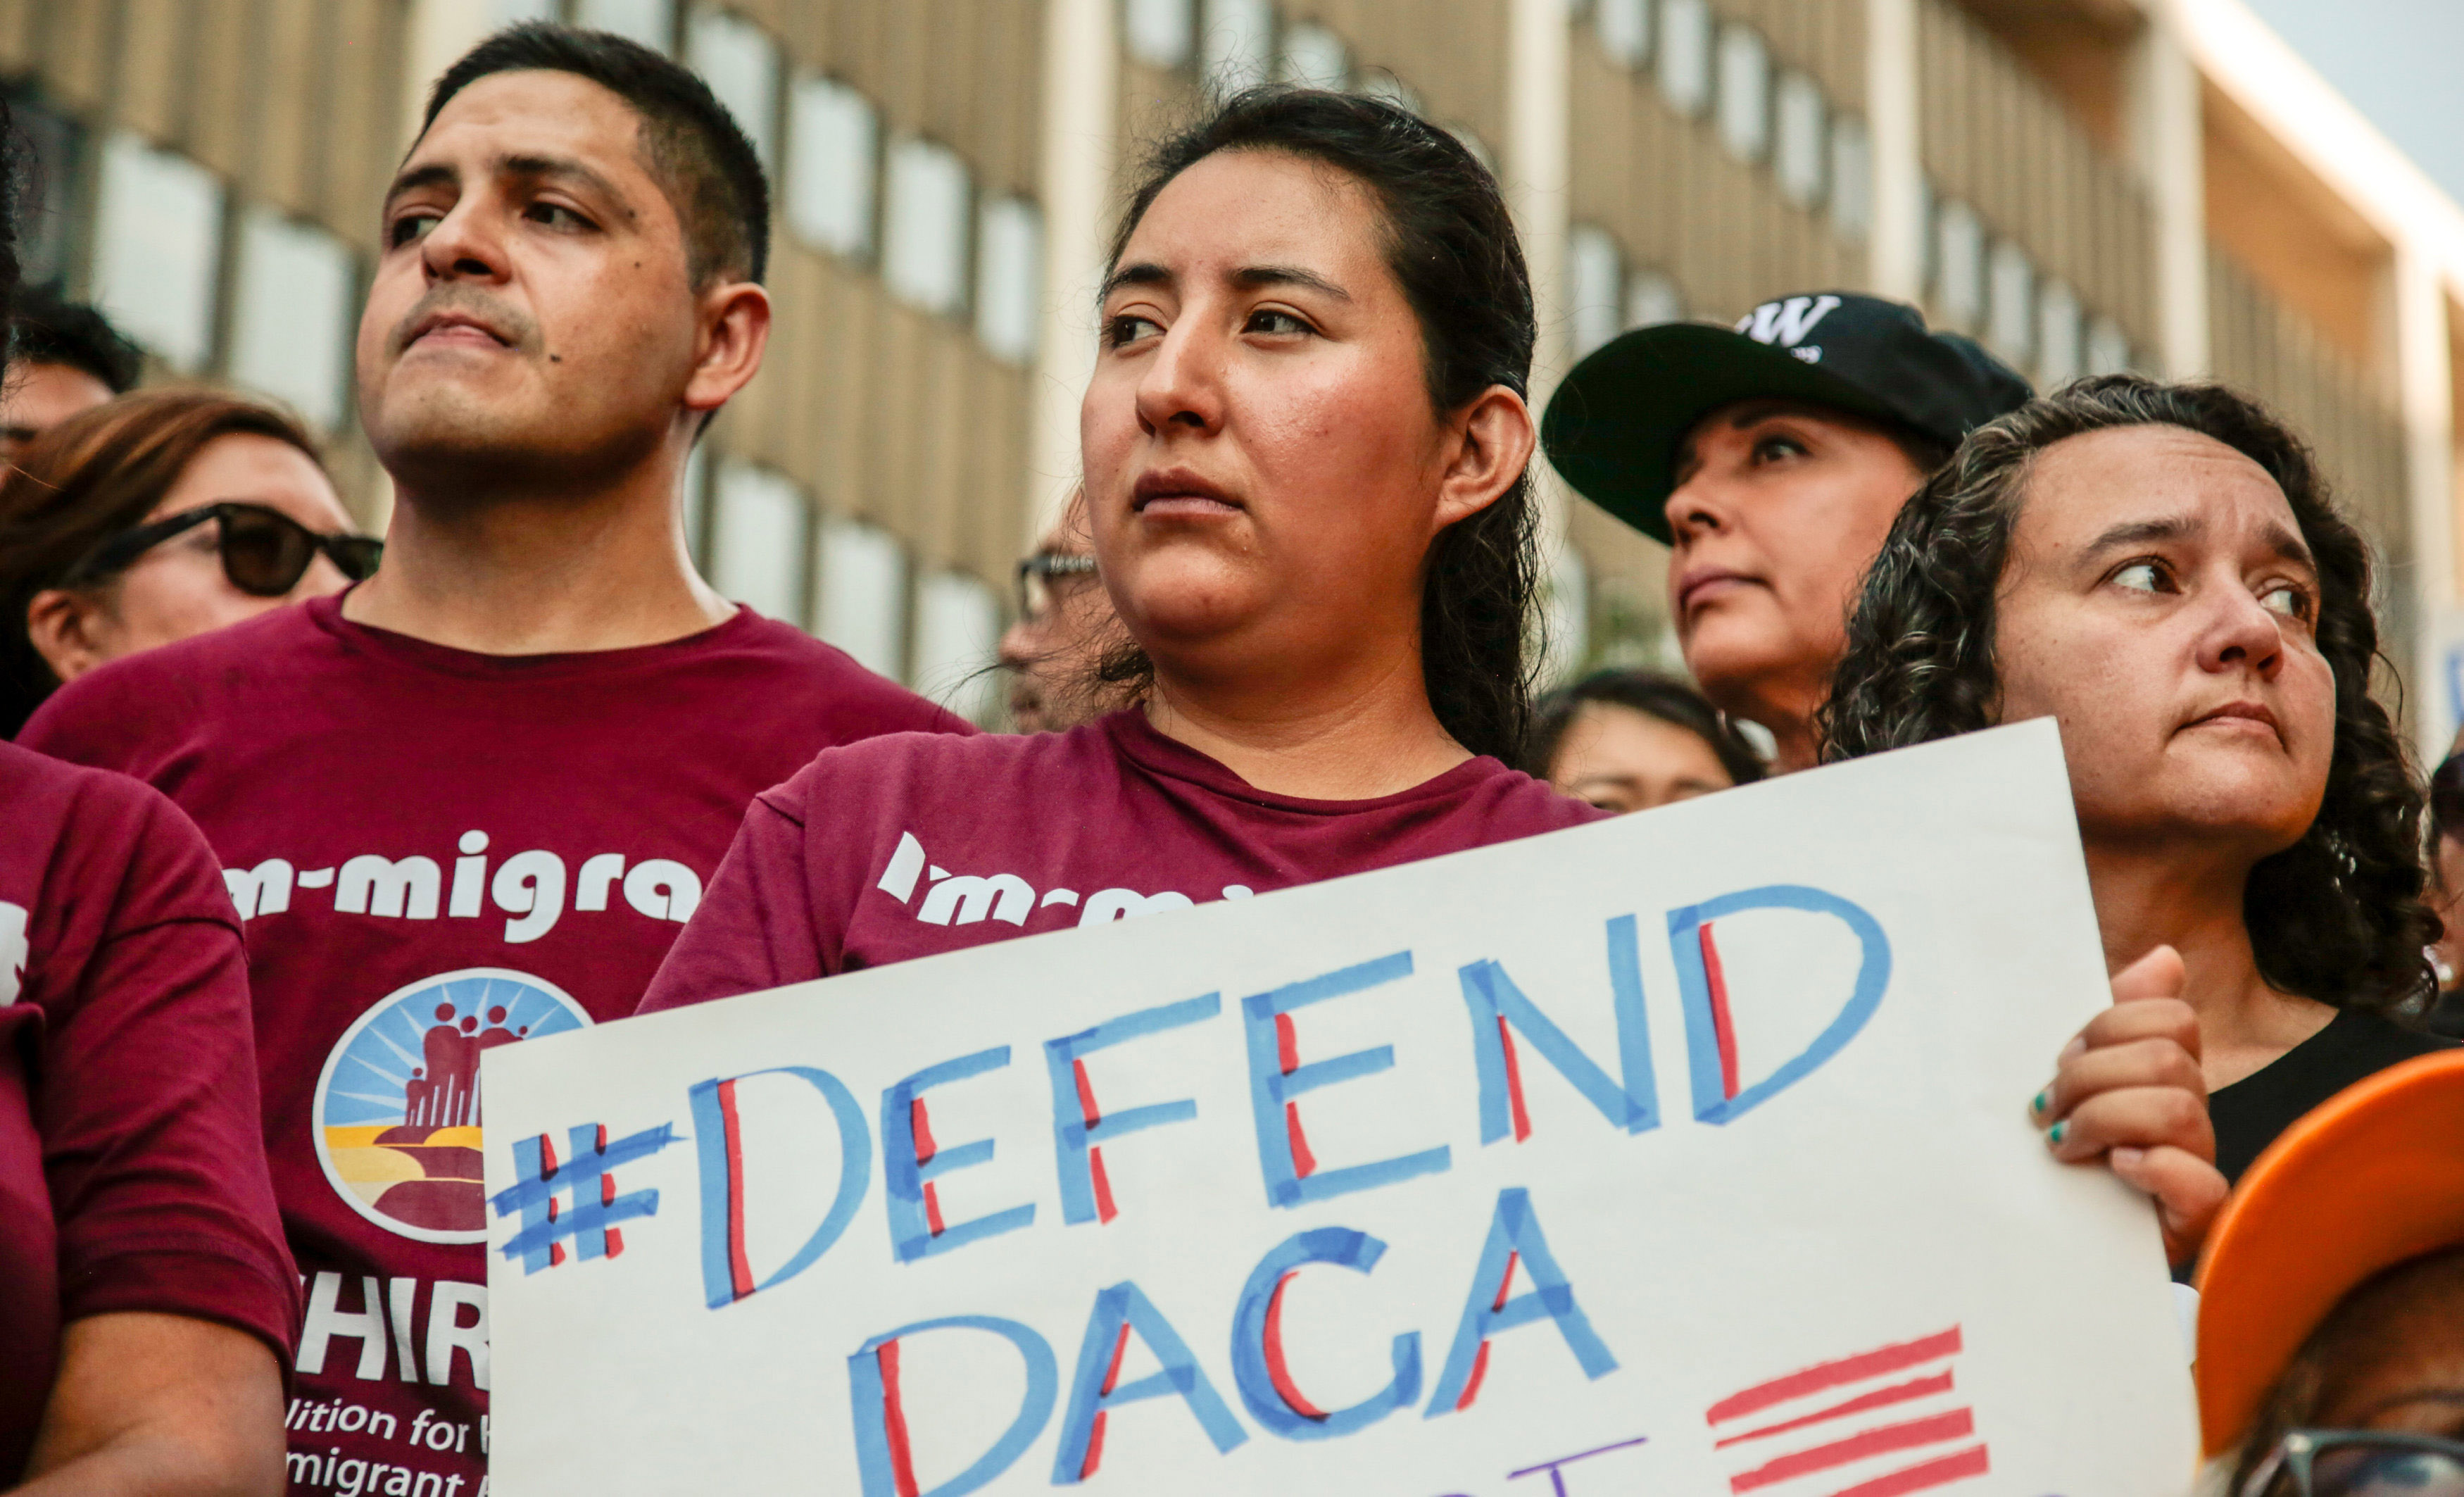 Protesters gather to show support for the Deferred Action for Childhood Arrivals program outside the Federal Building in Los Angeles, California, U.S., September 1, 2017.